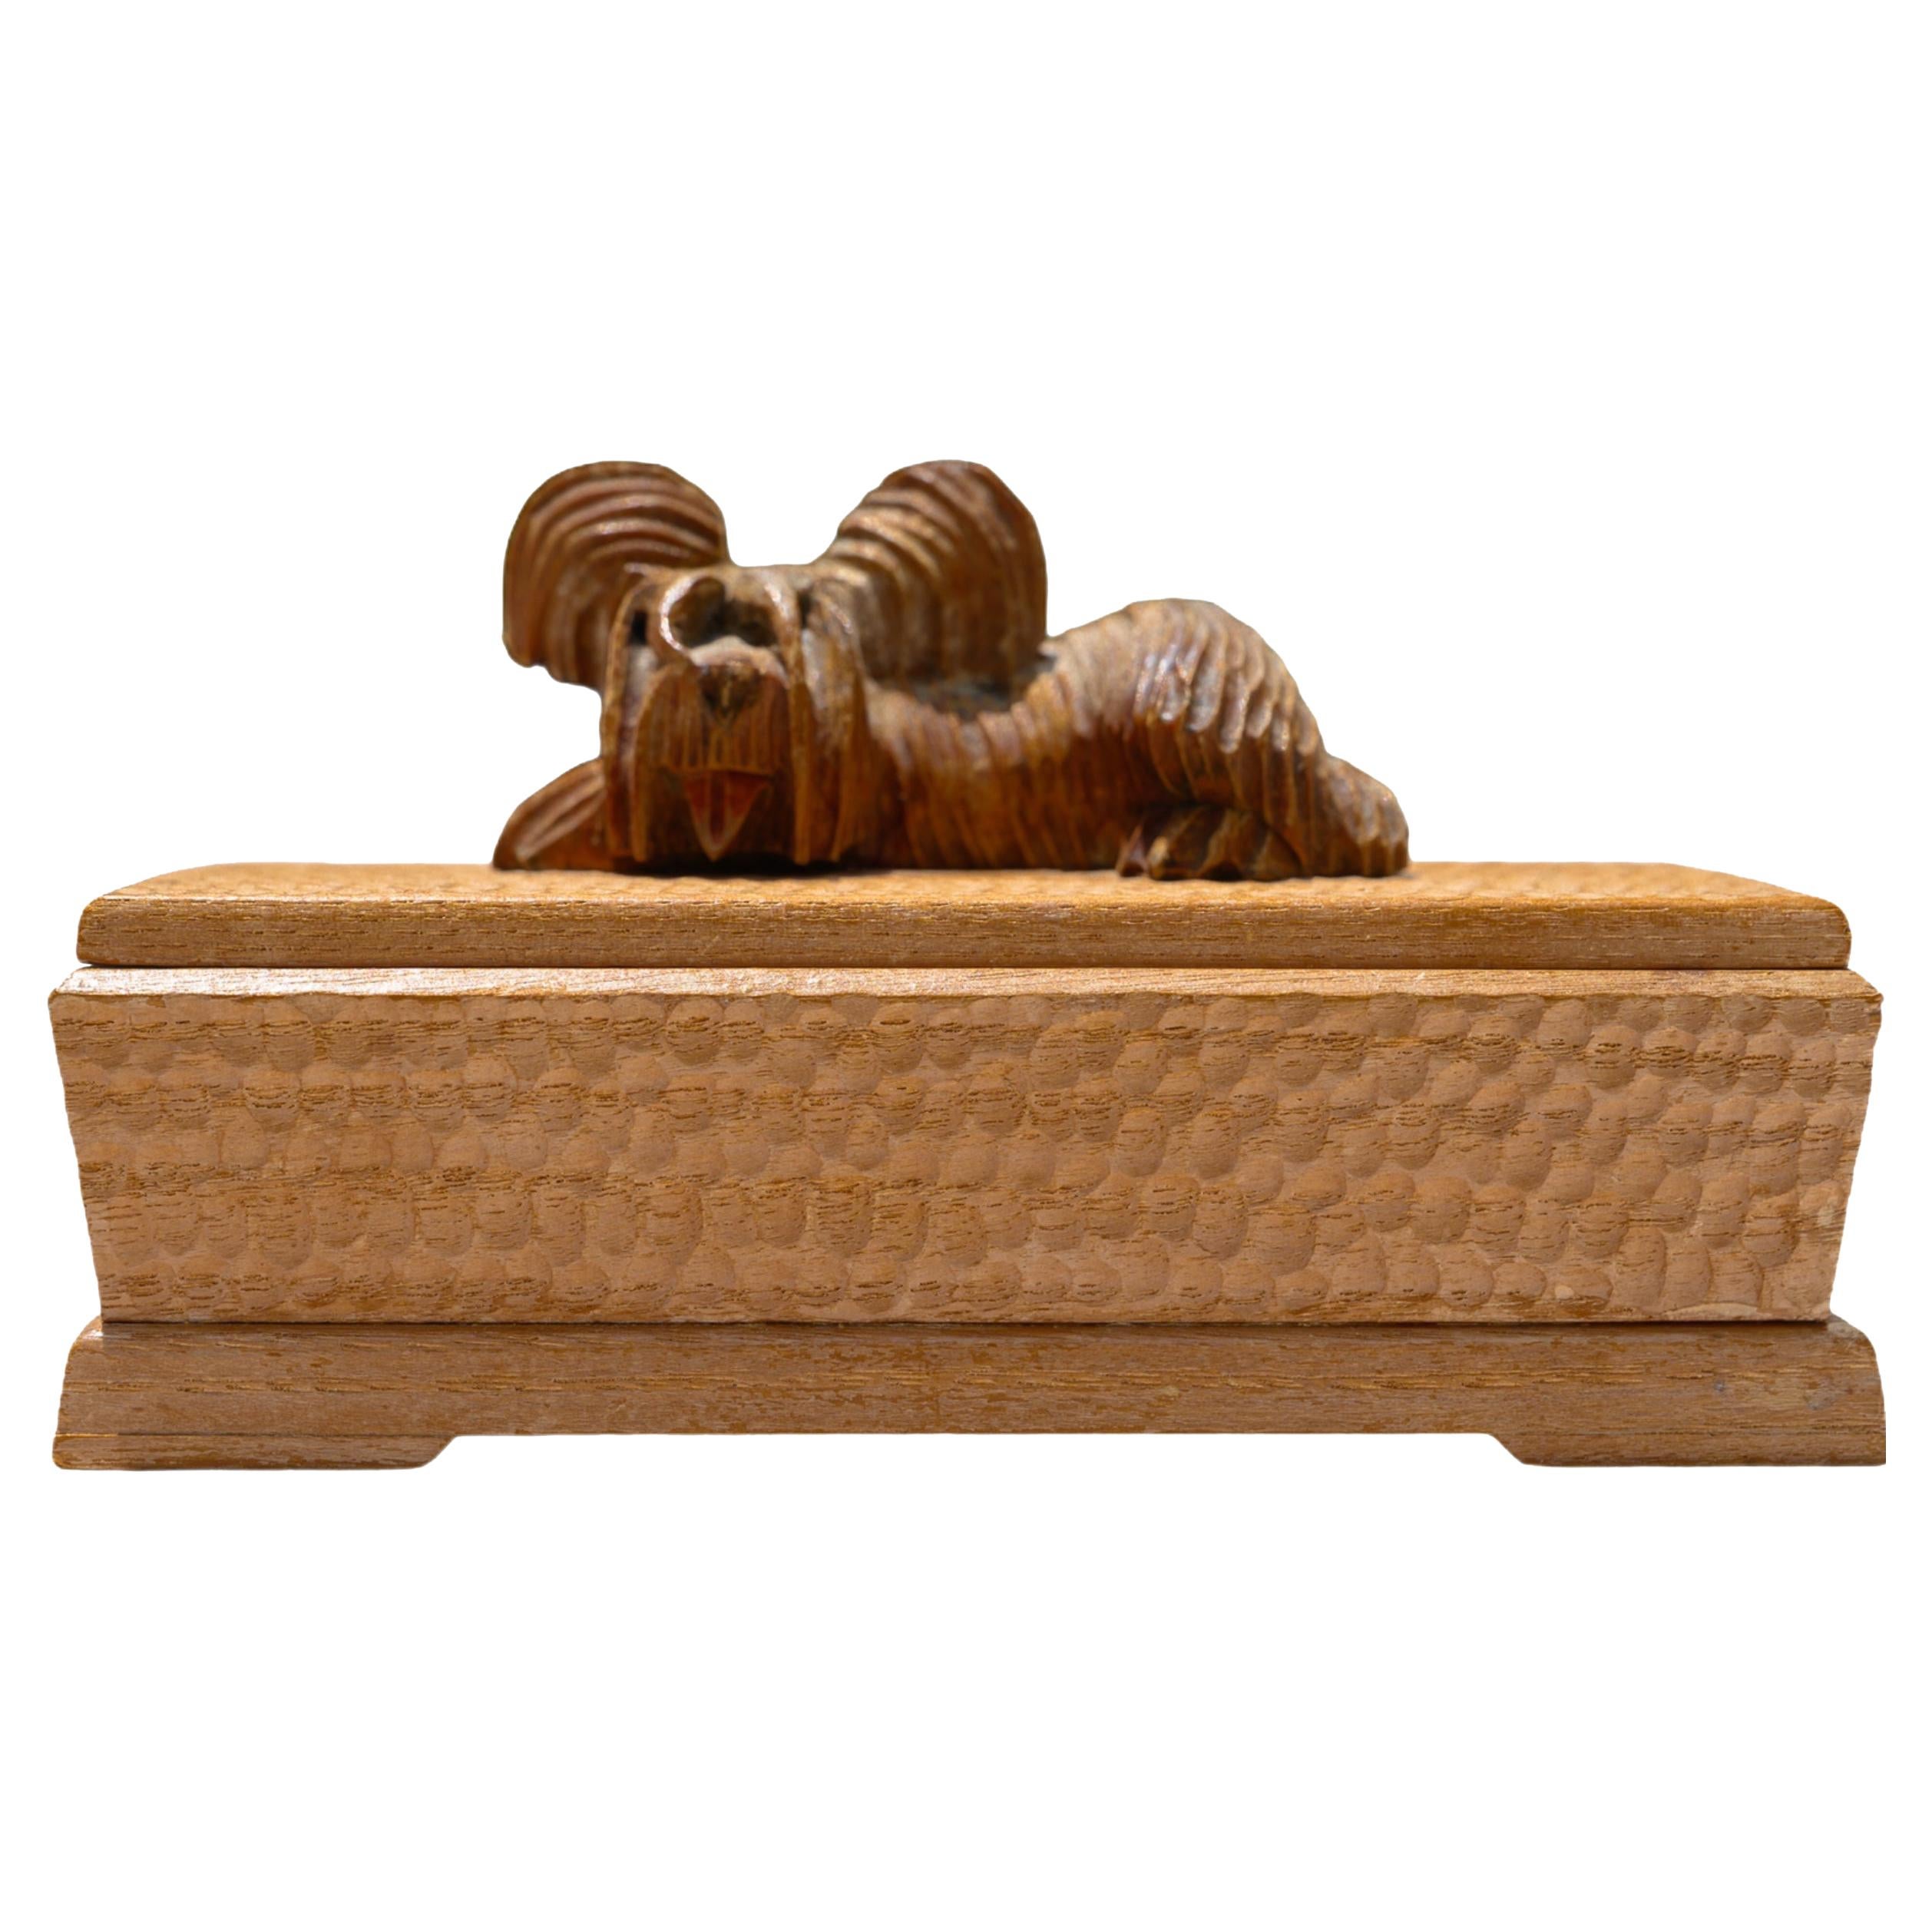 Hand-Carved Decorative Wooden Keepsake Box with Animal Sculpture Lidded Top